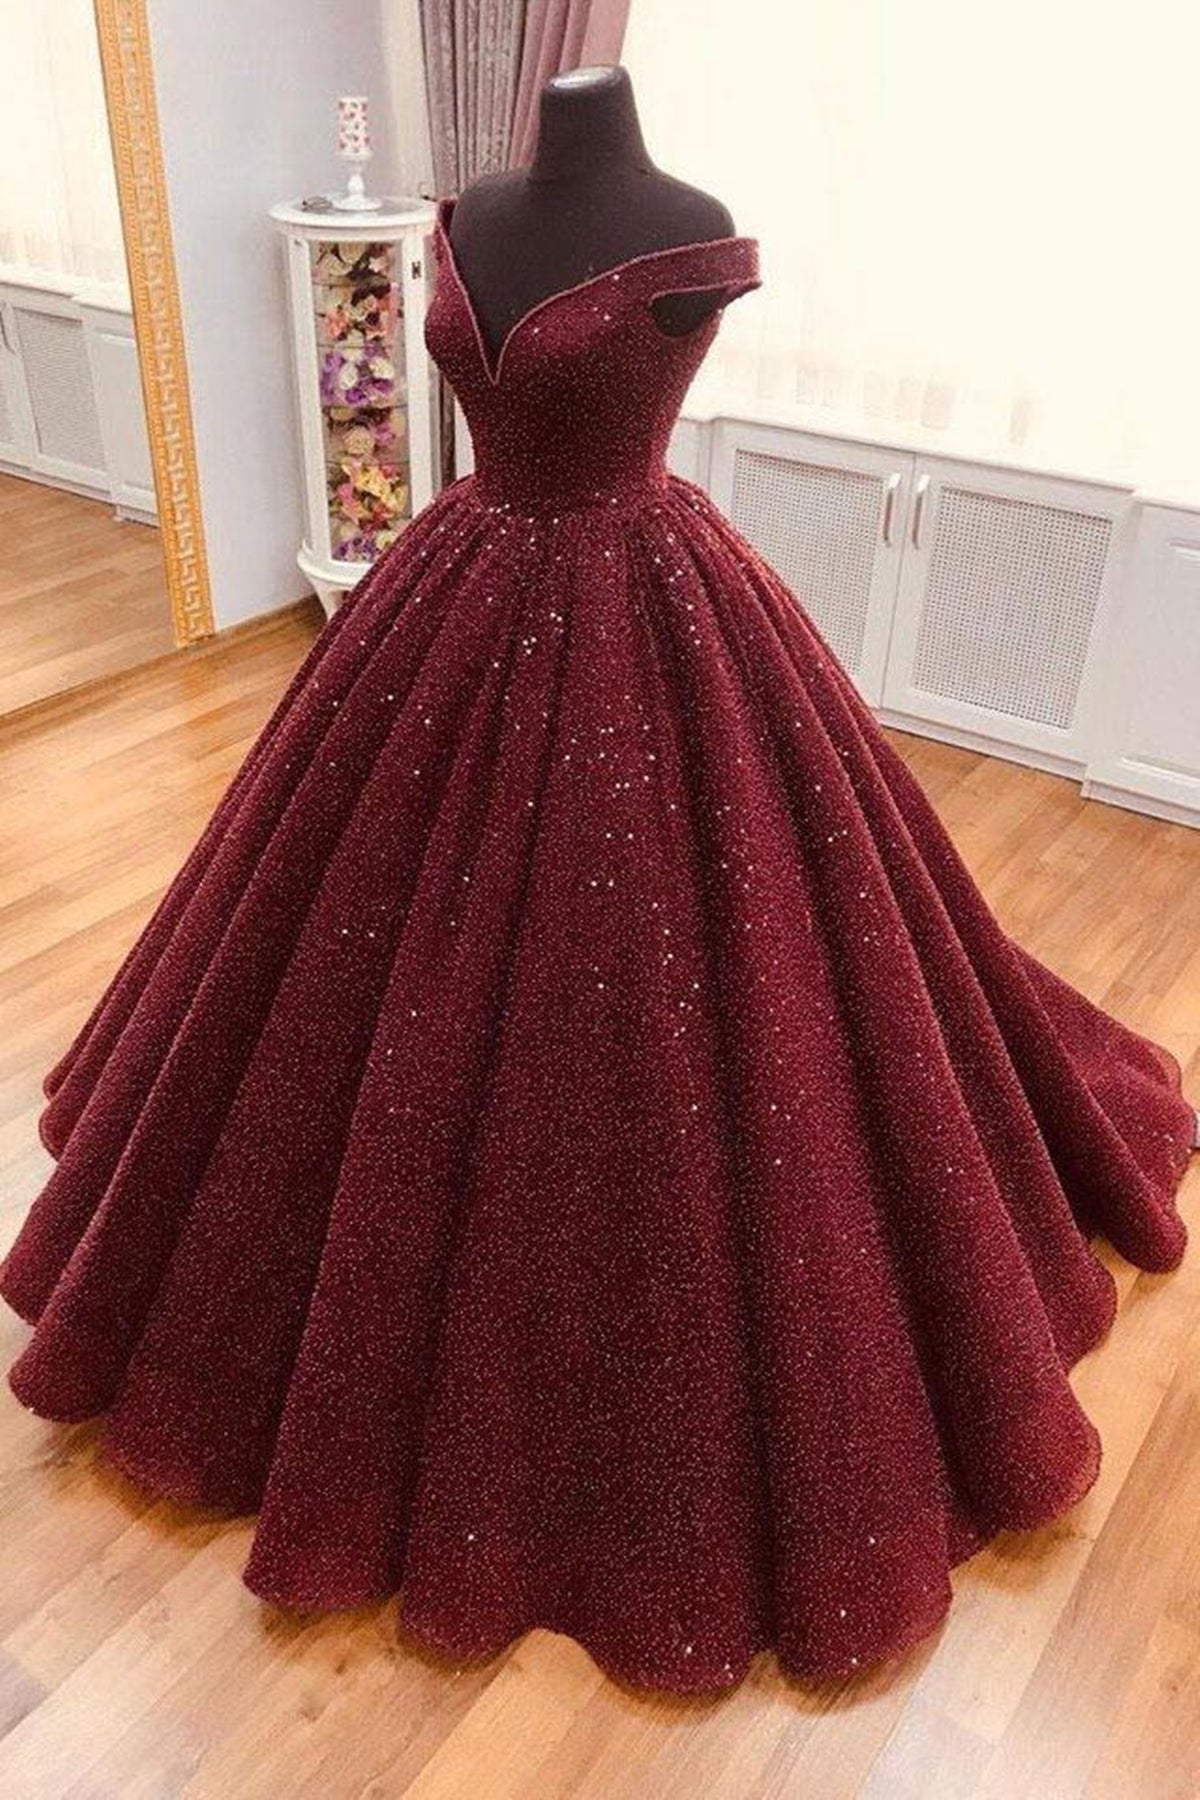 NEW ] Wine Red Elegant Classic Fishtail Gown Gala Prom Wedding dress,  Women's Fashion, Dresses & Sets, Evening Dresses & Gowns on Carousell